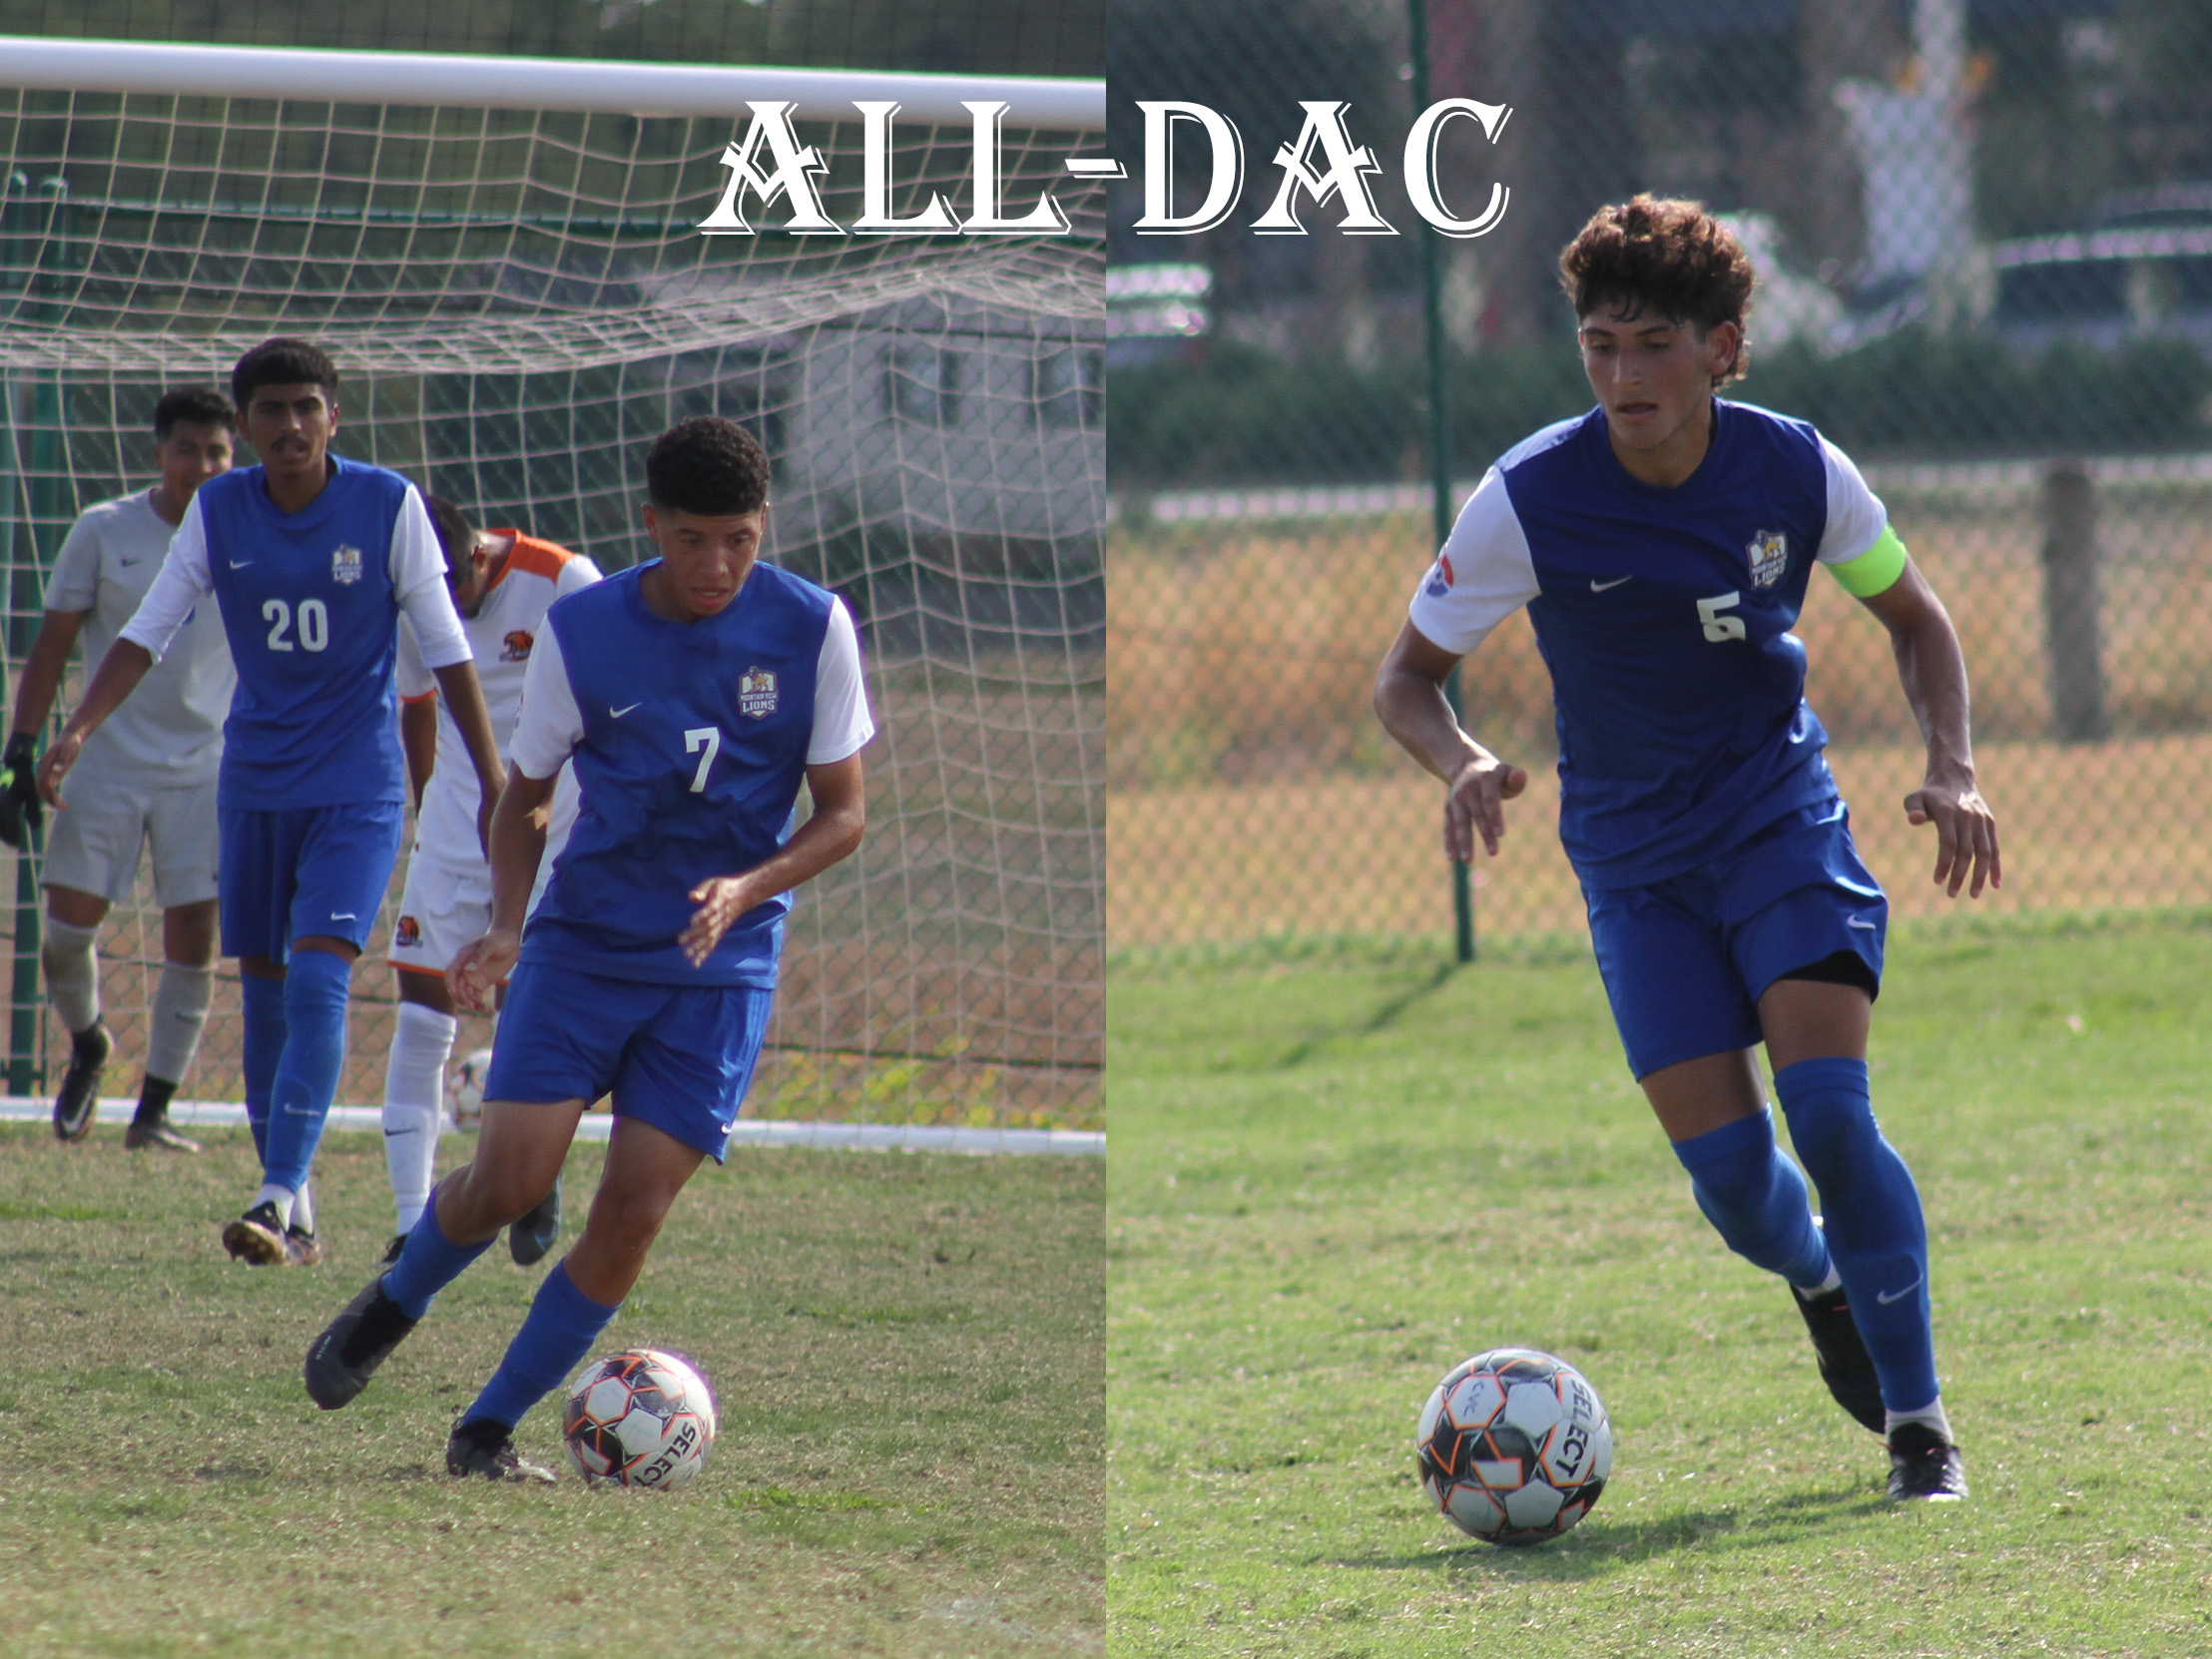 Five Men's Soccer Players Earn All-DAC Honors